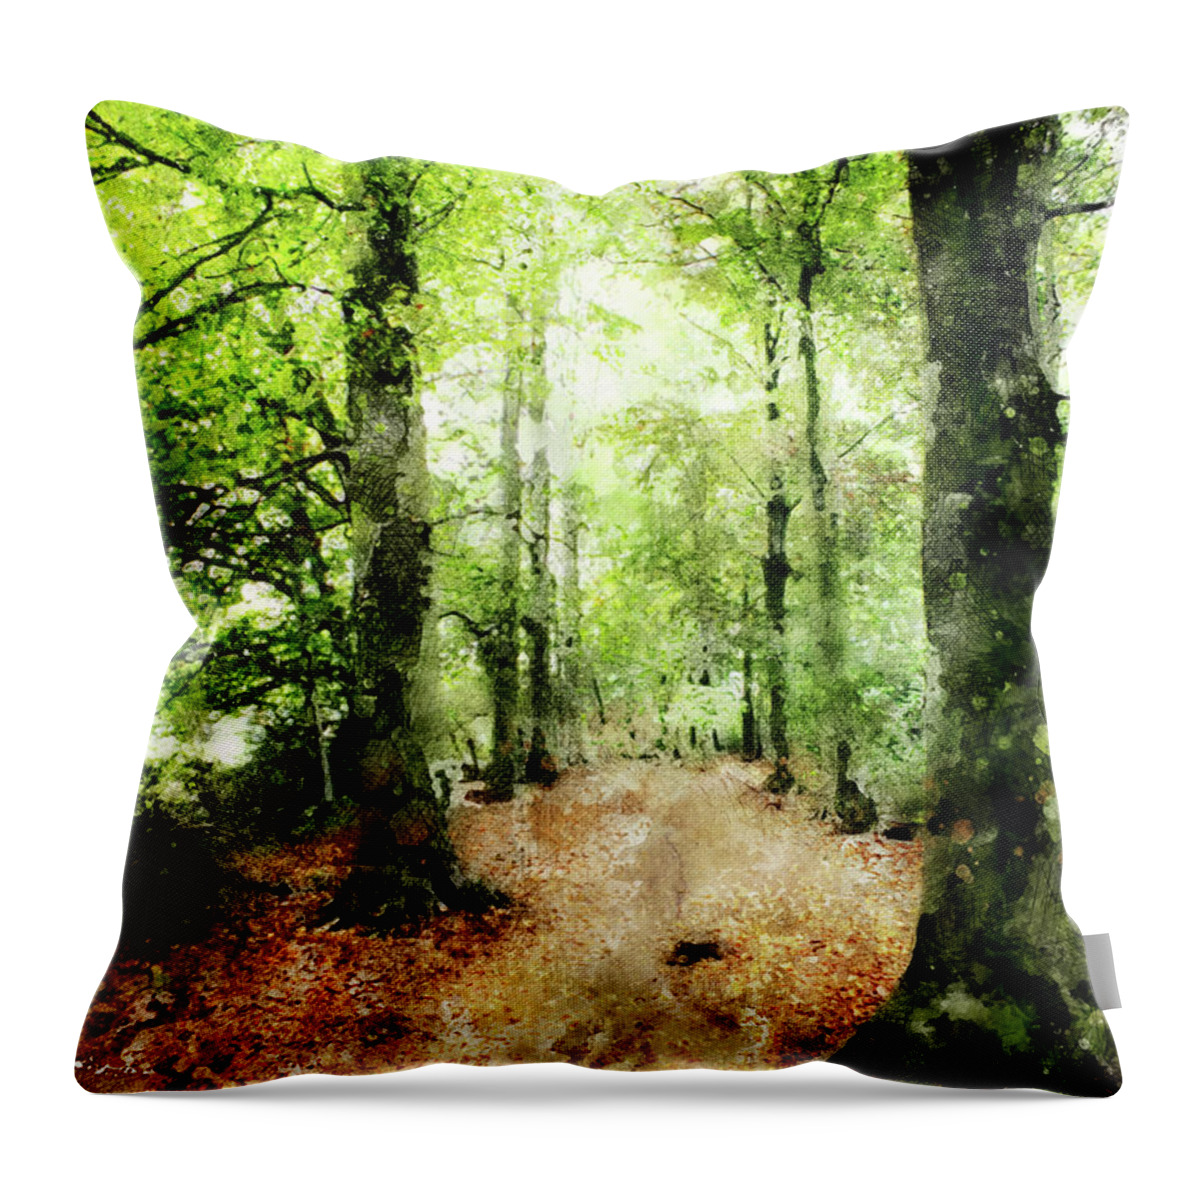 Forest Throw Pillow featuring the digital art In The Wood Frame by Art Di